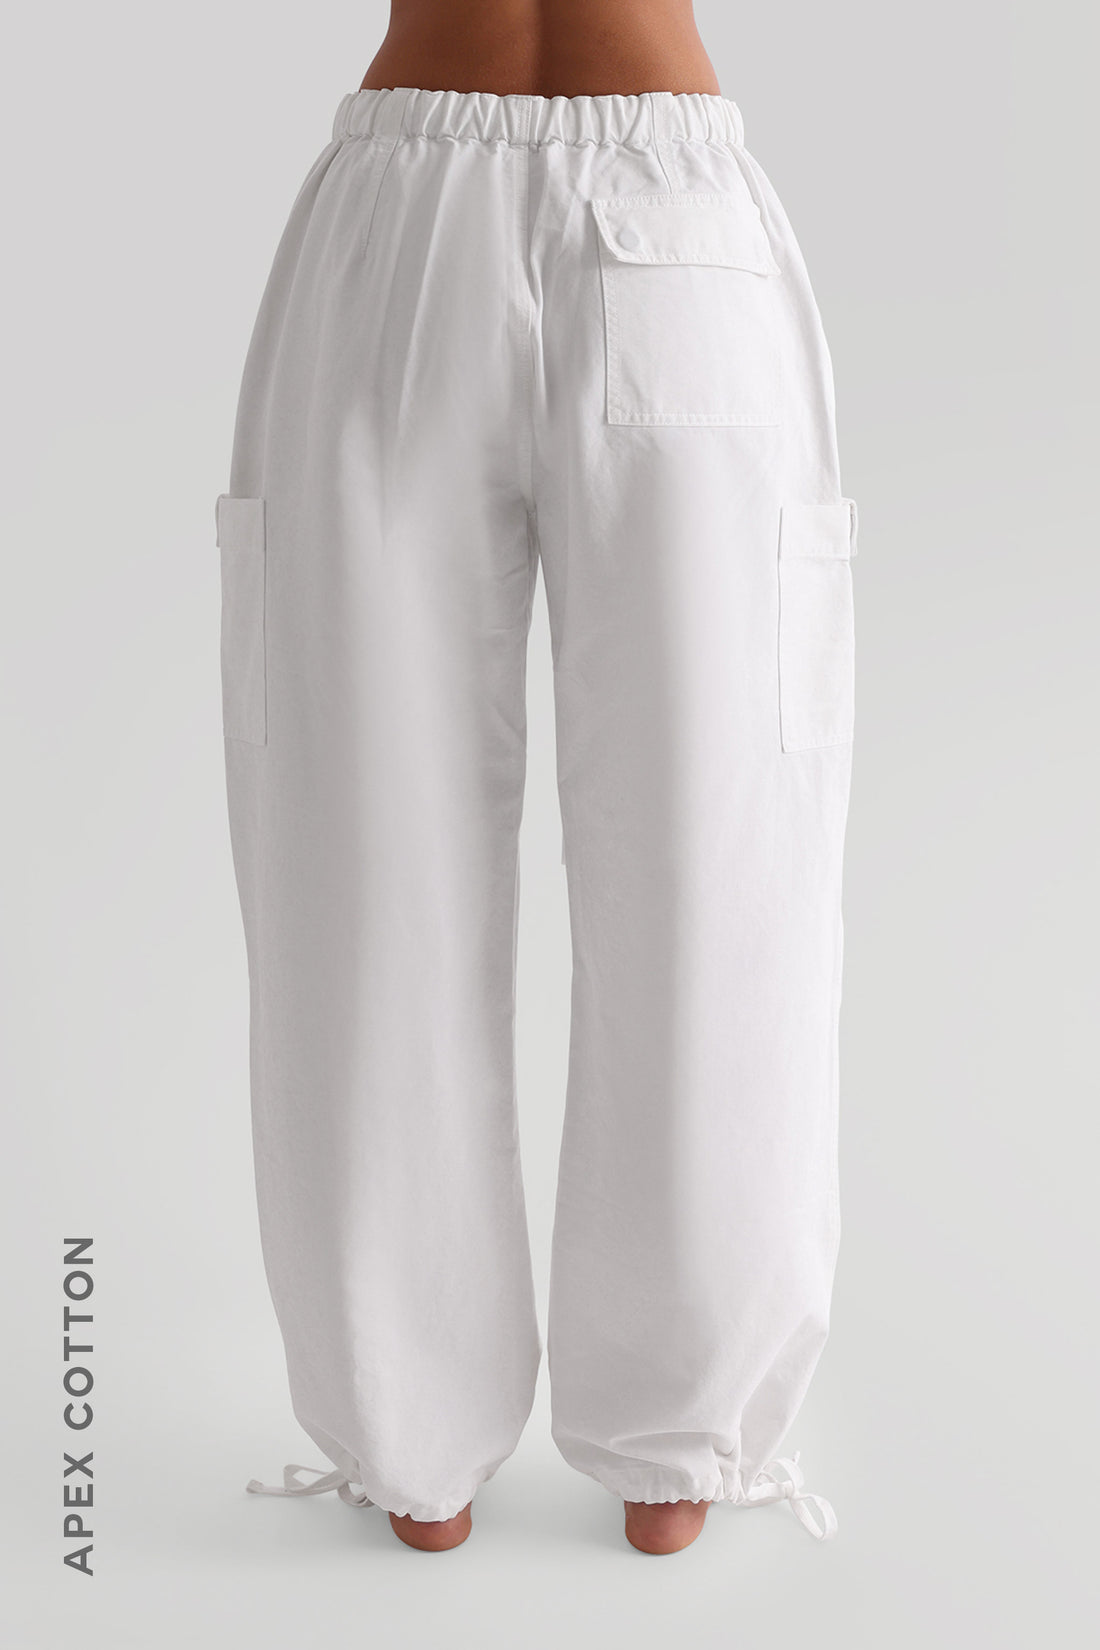 Essential Cargo Pants - White Wash